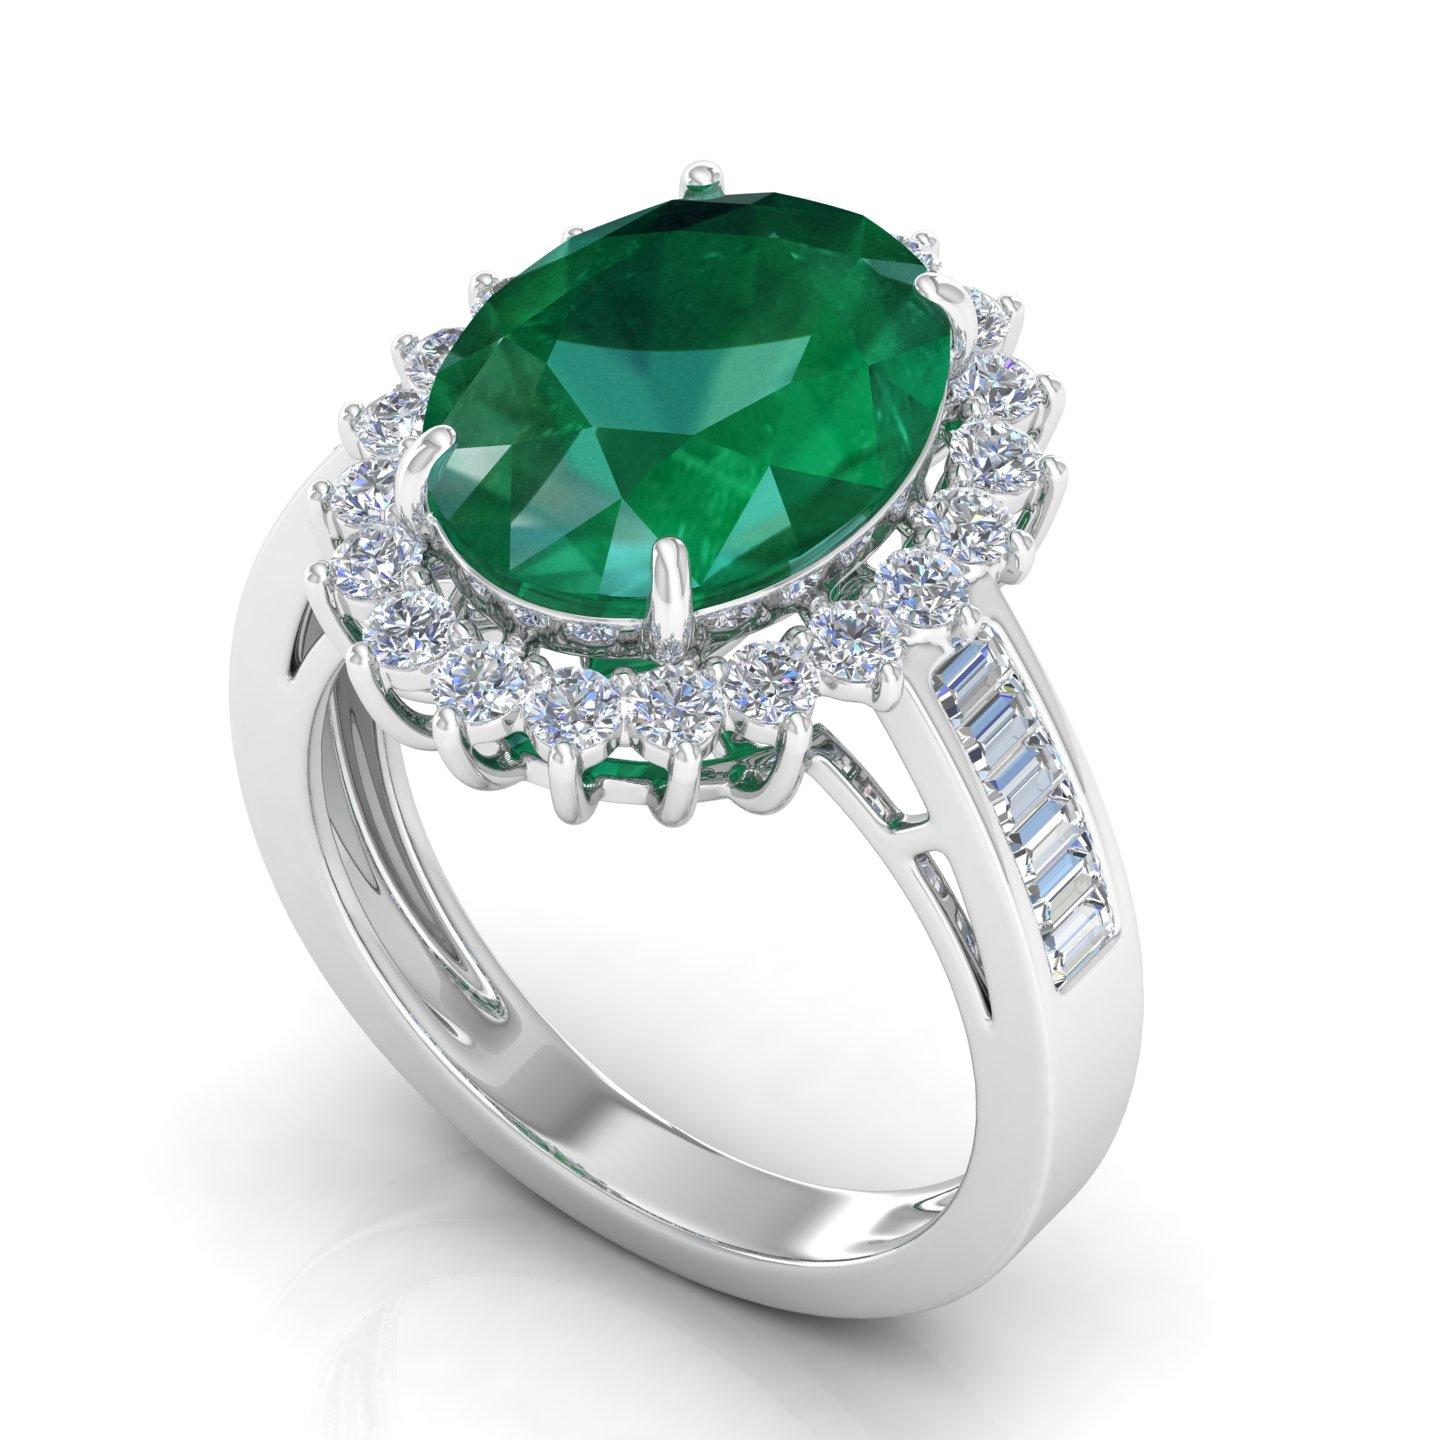 For Sale:  Oval Natural Emerald Gemstone Cocktail Ring Diamond 10 Karat White Gold Jewelry 7